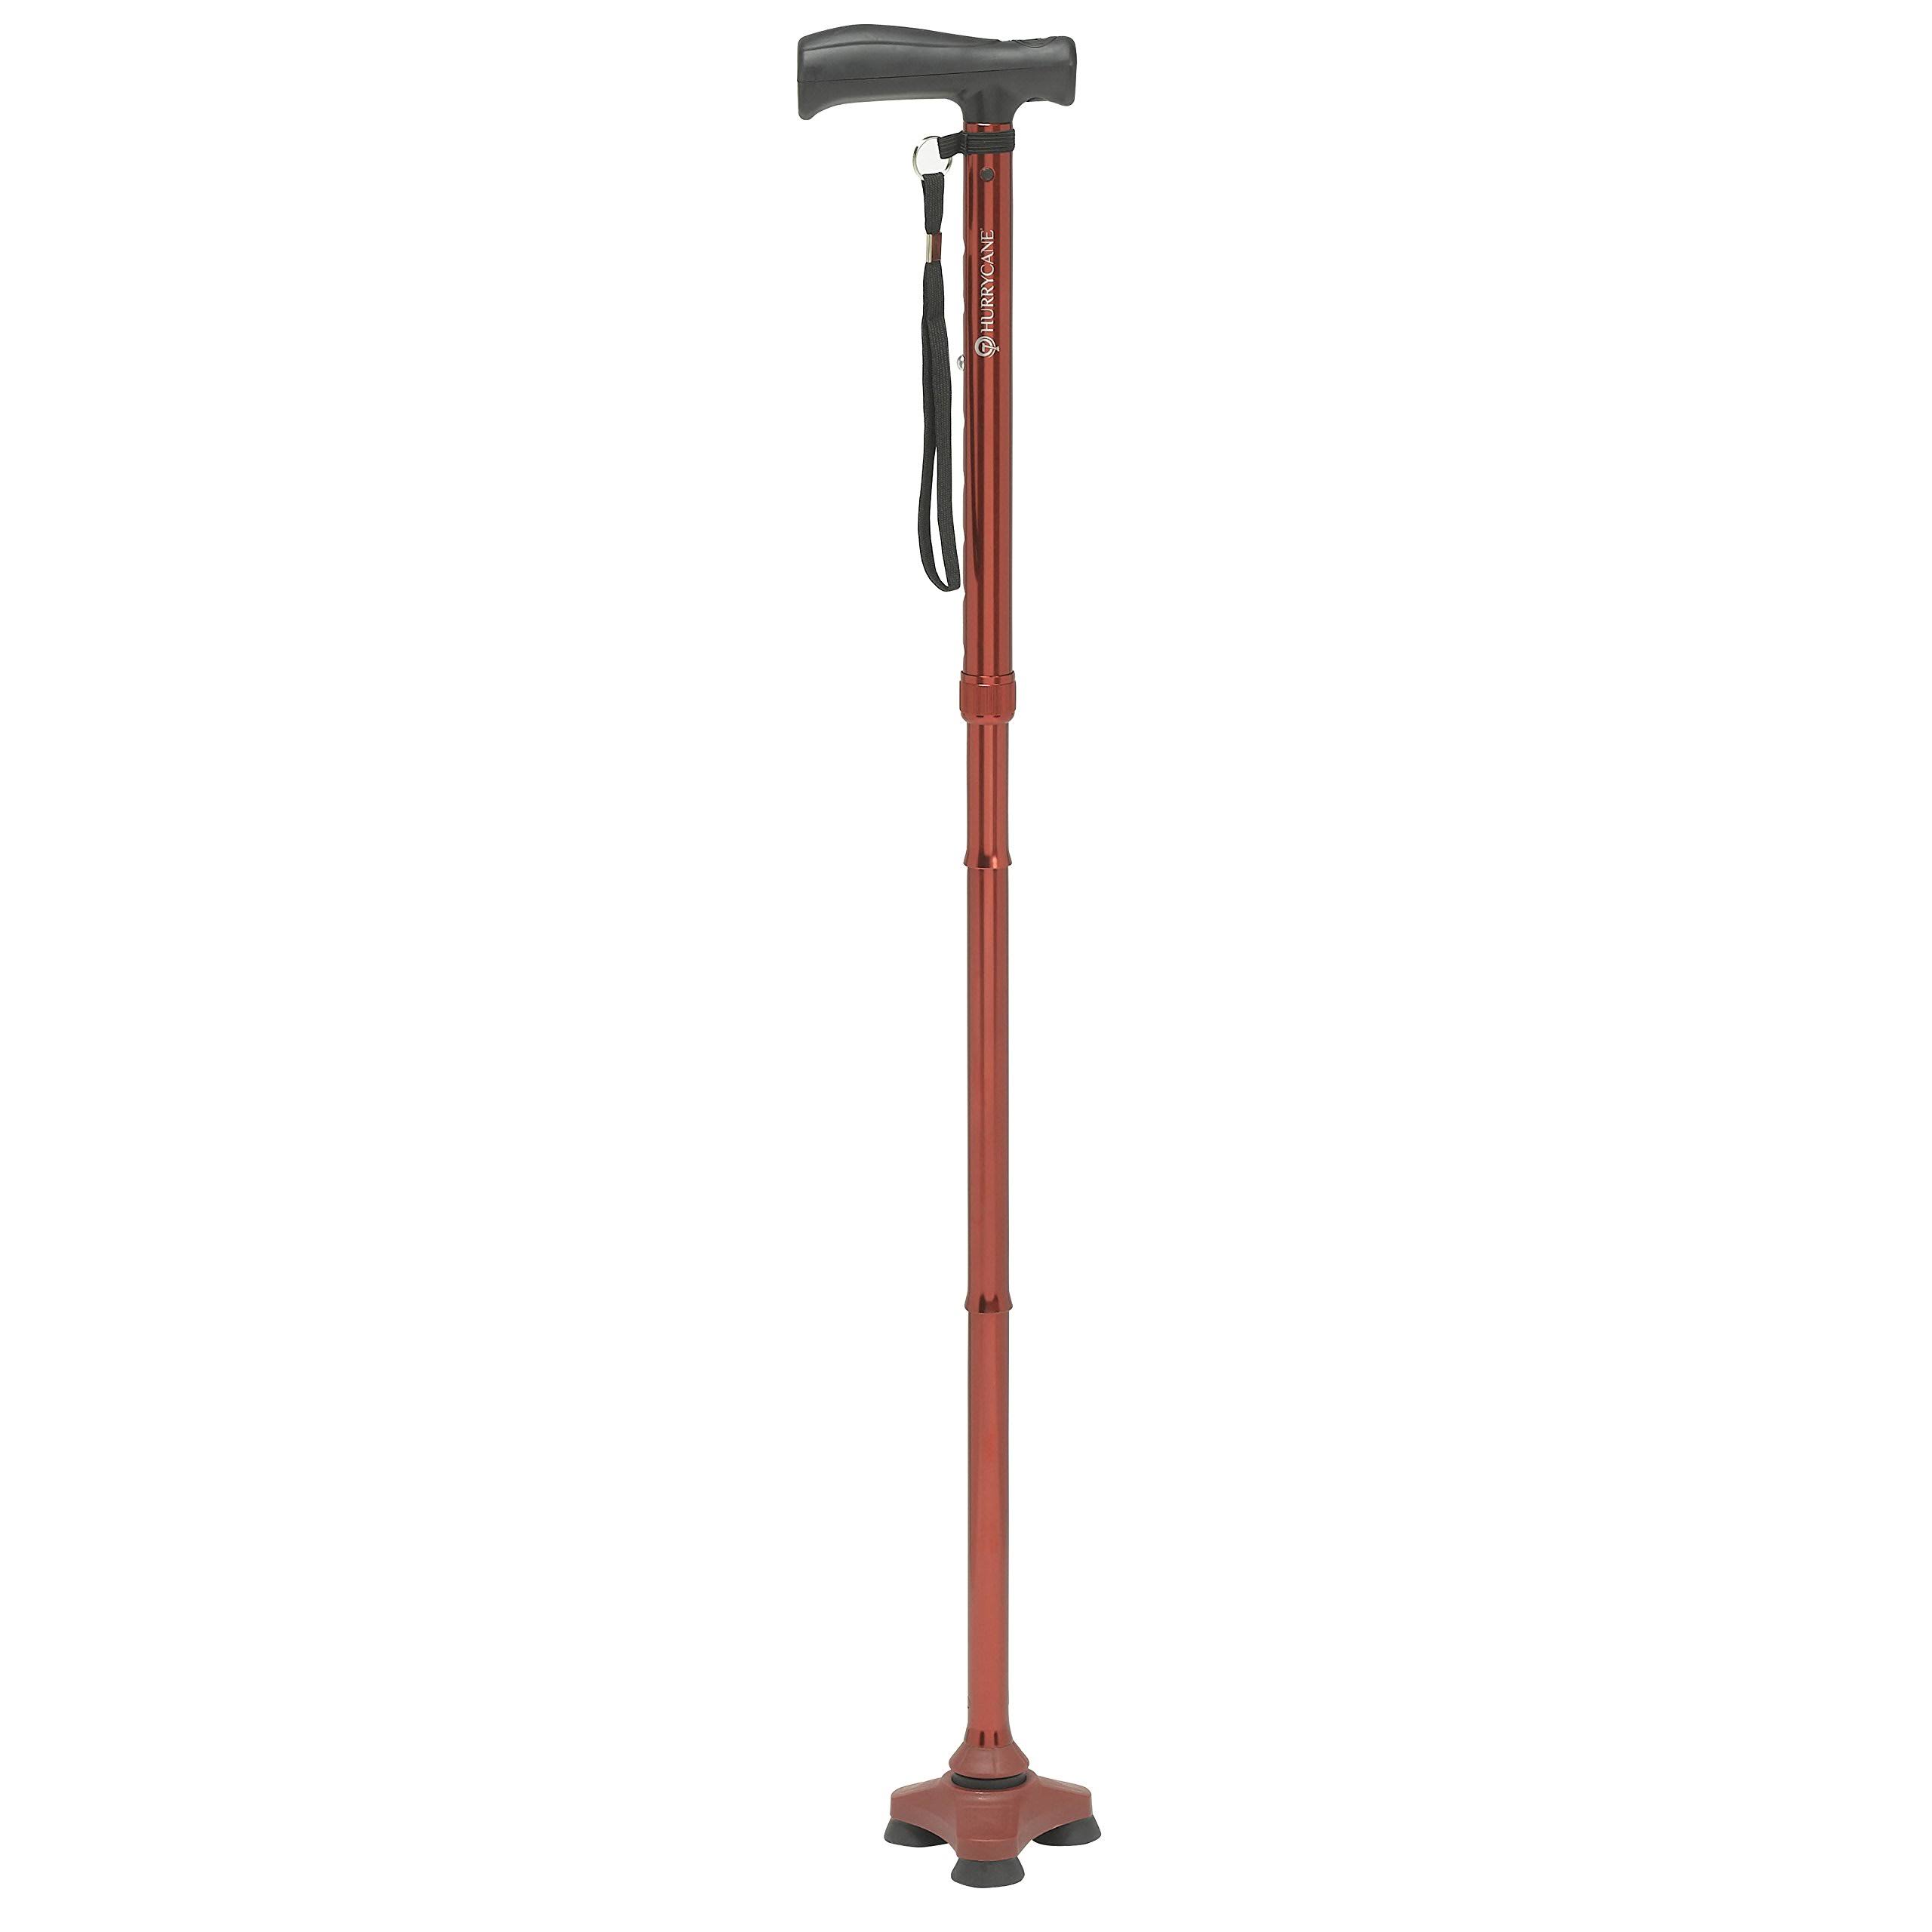 HurryCane Freedom Edition Folding Cane with T Handle - Roadrunner Red